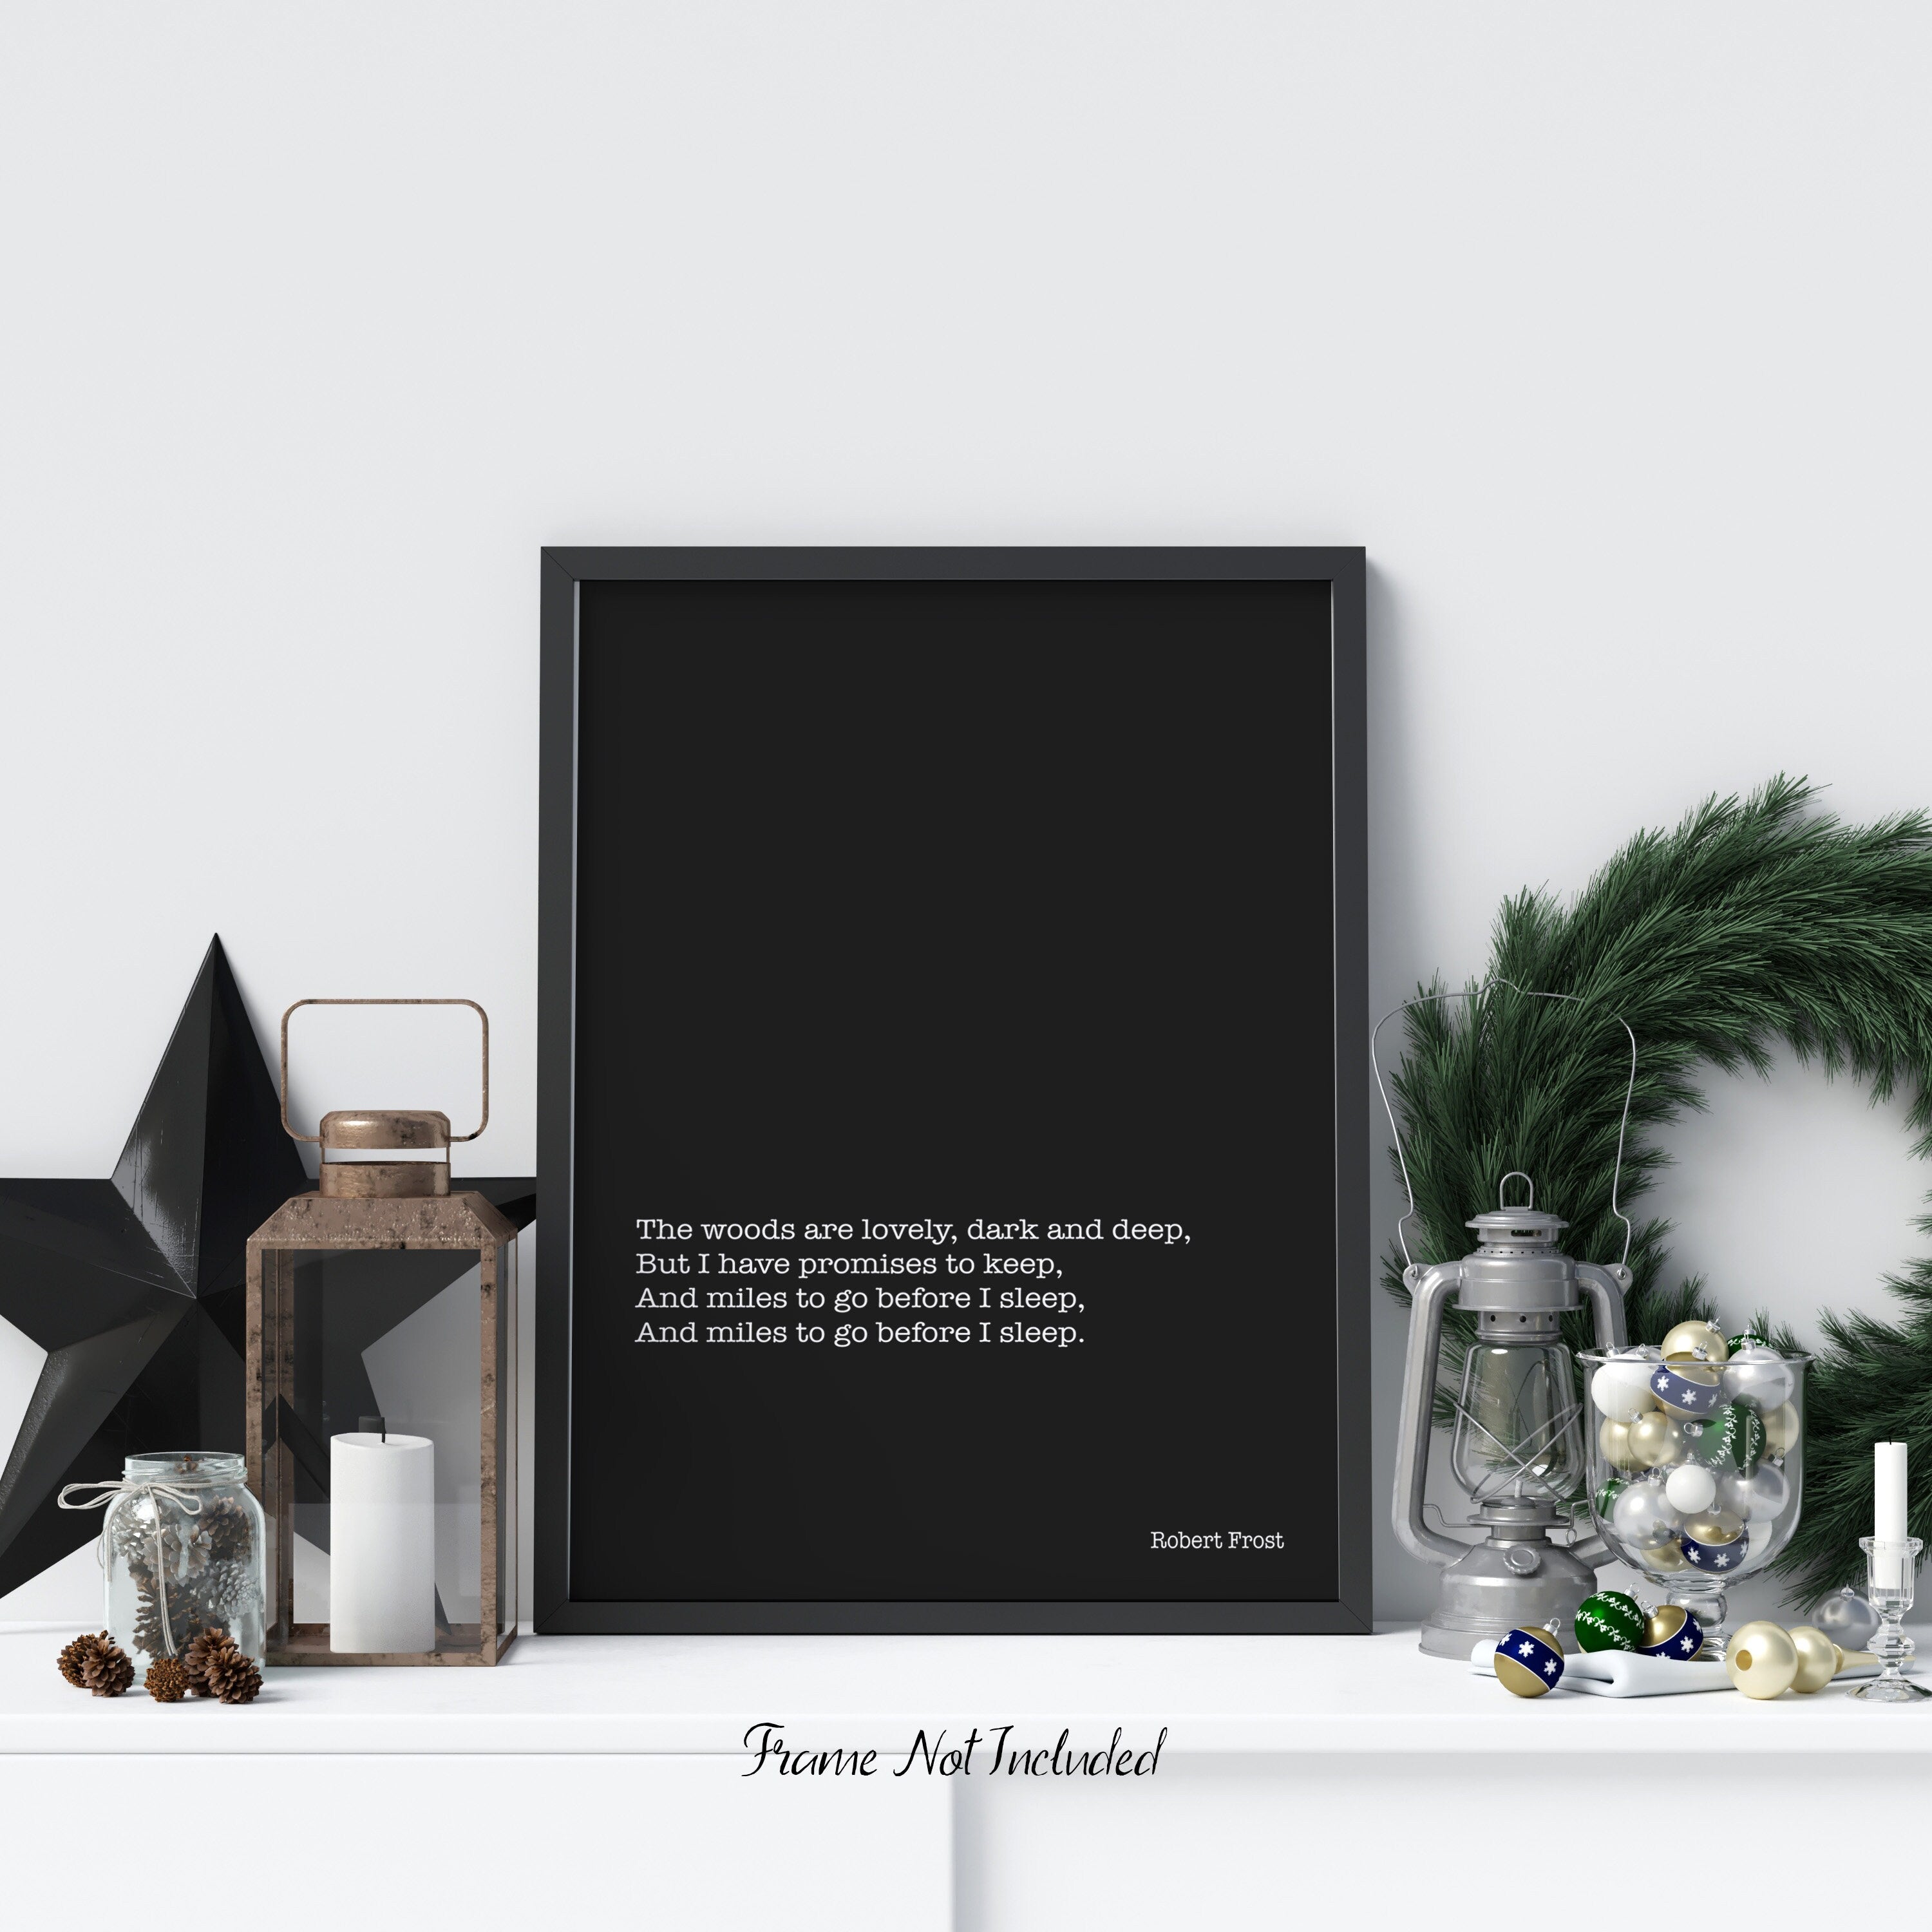 Robert Frost Poem Print, Snowy Evening Minimalist Scandinavian Style Poetry Poster in Black & White for Home Wall Decor